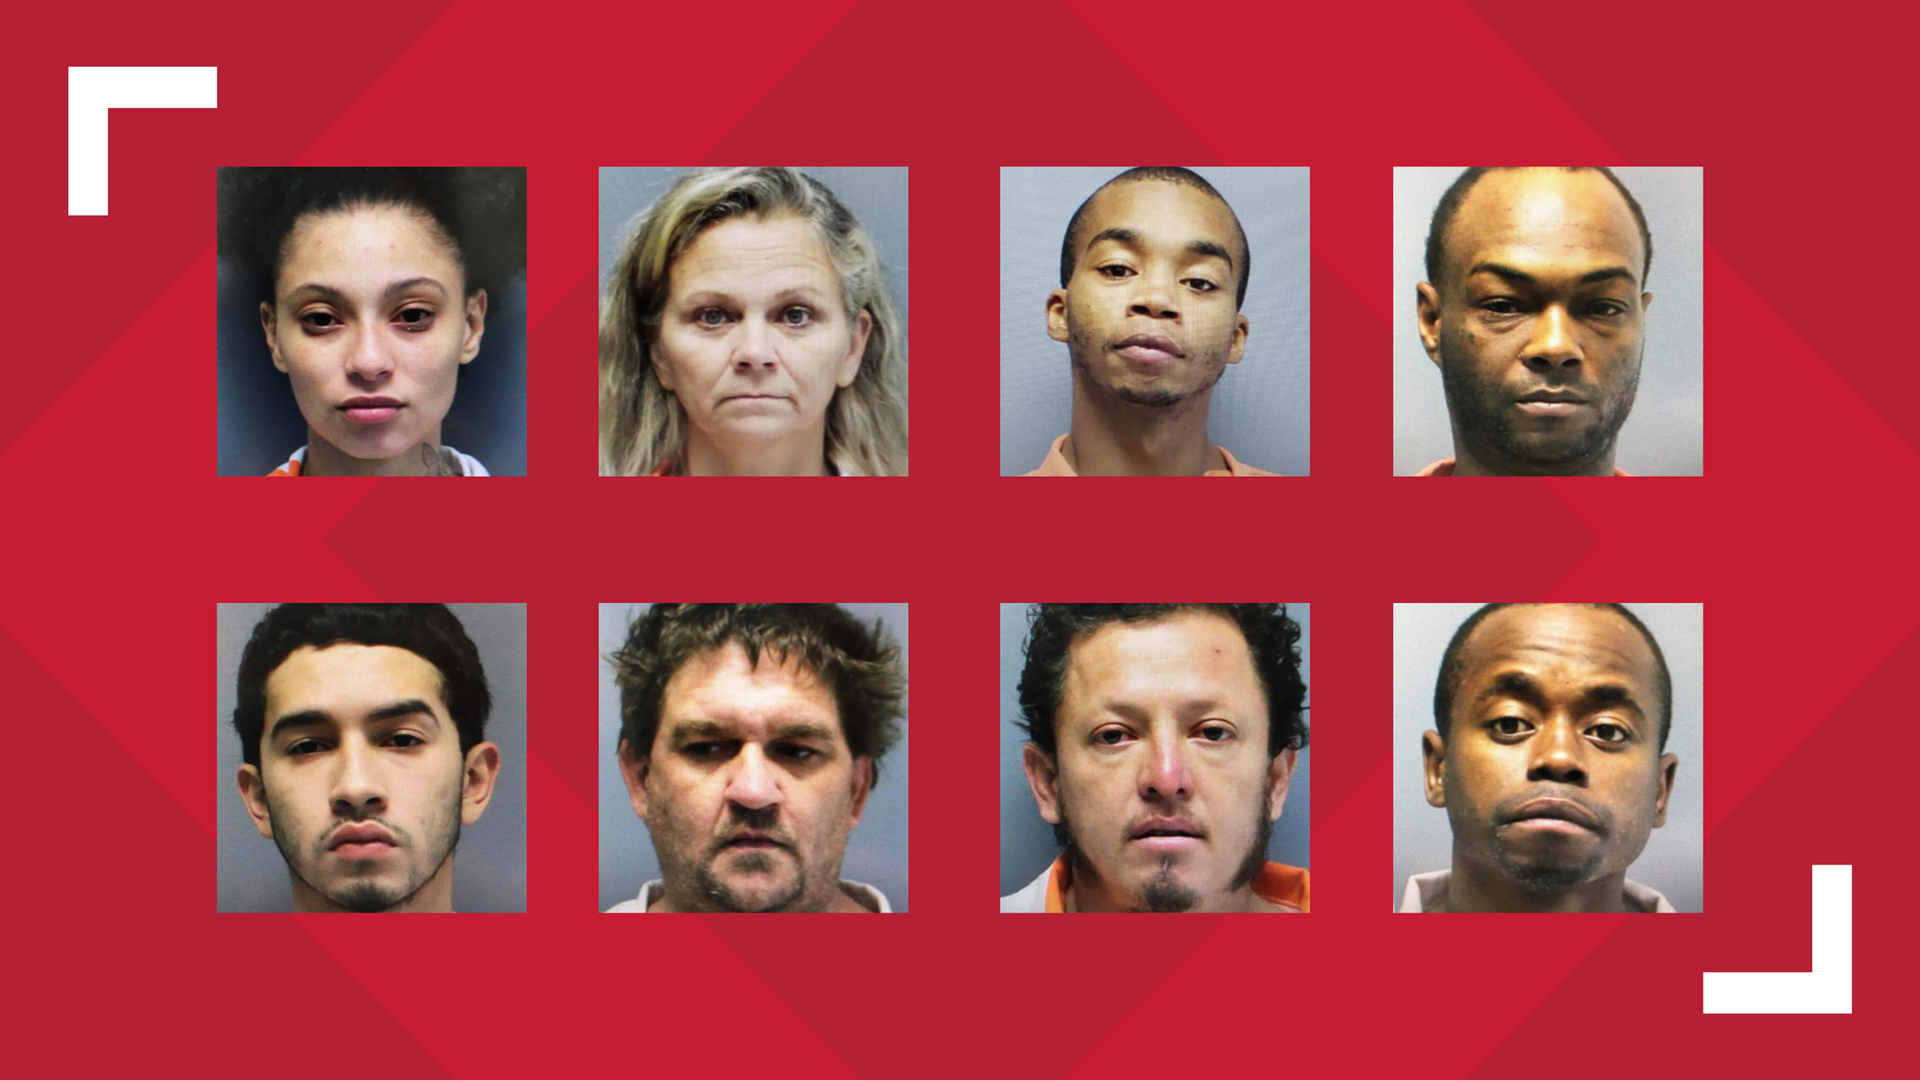 Eight people were arrested after deputies served a searched warrant on a residence described as a "7-Eleven" for drug sales.